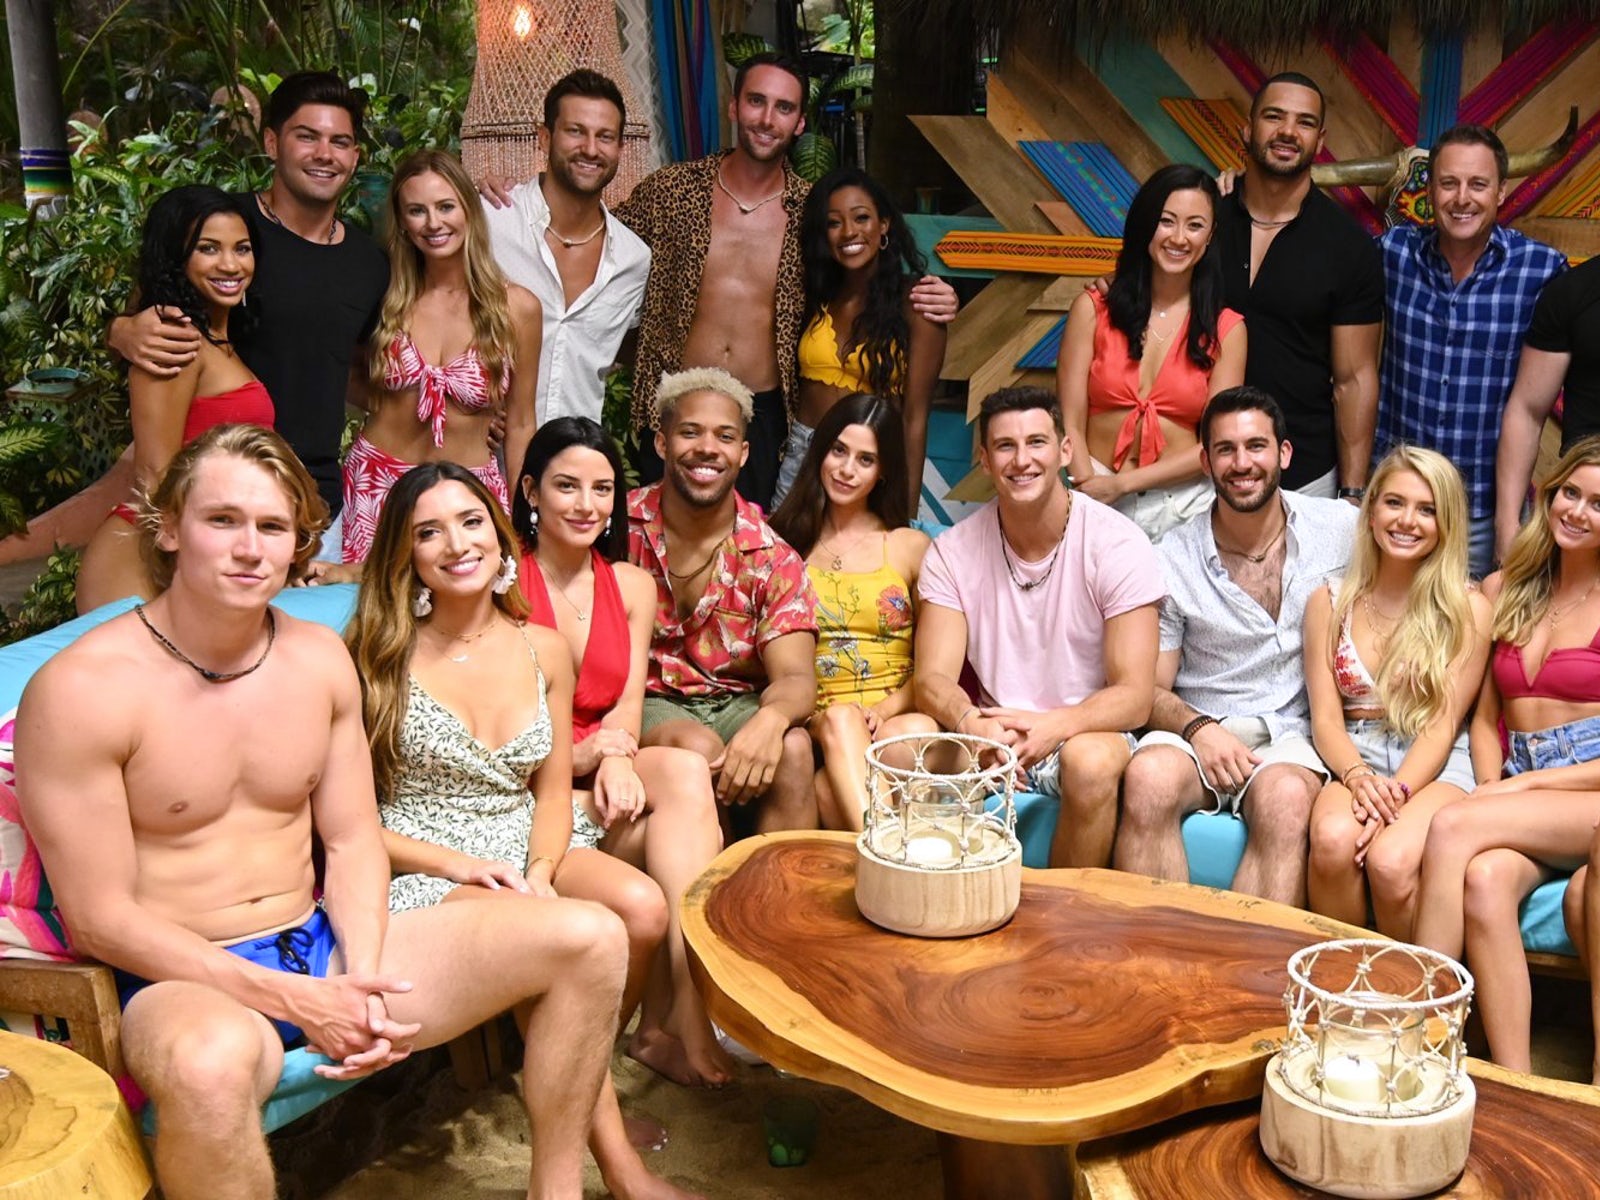 'The Bachelor' franchise may be getting new spinoff shows on Hulu